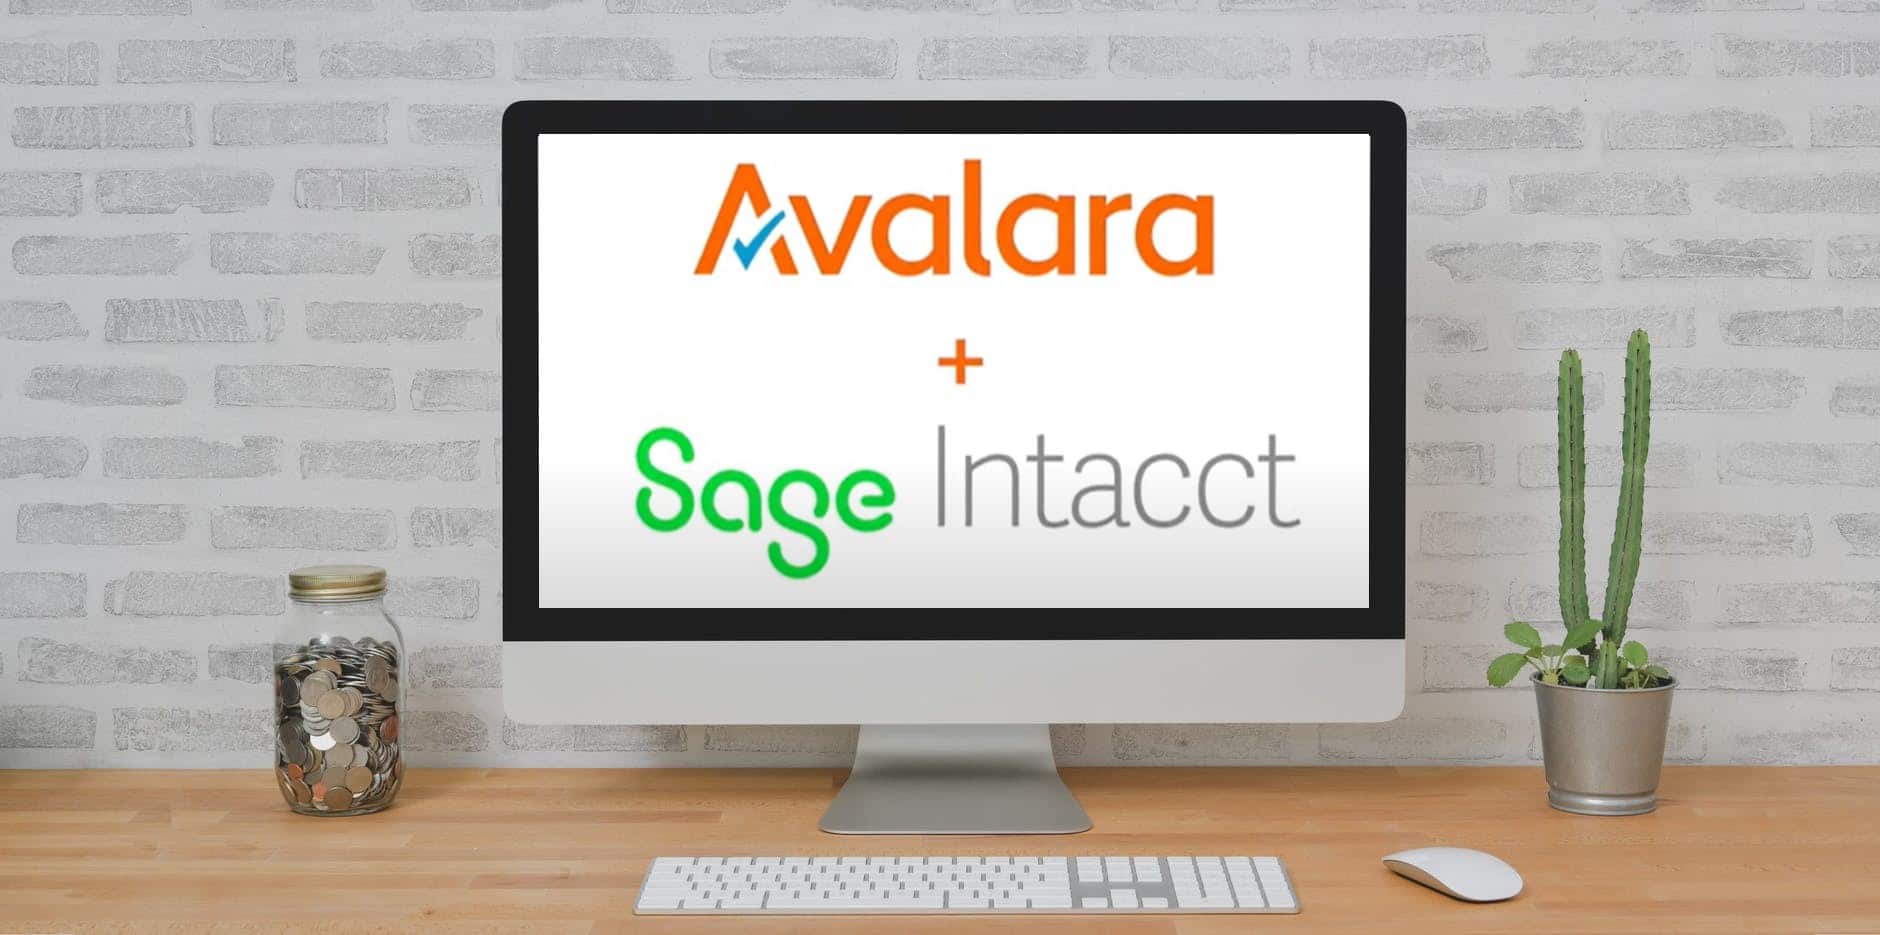 sage-intacct-avalara-sales-tax-automation-accounting-software-integration image on laptop background